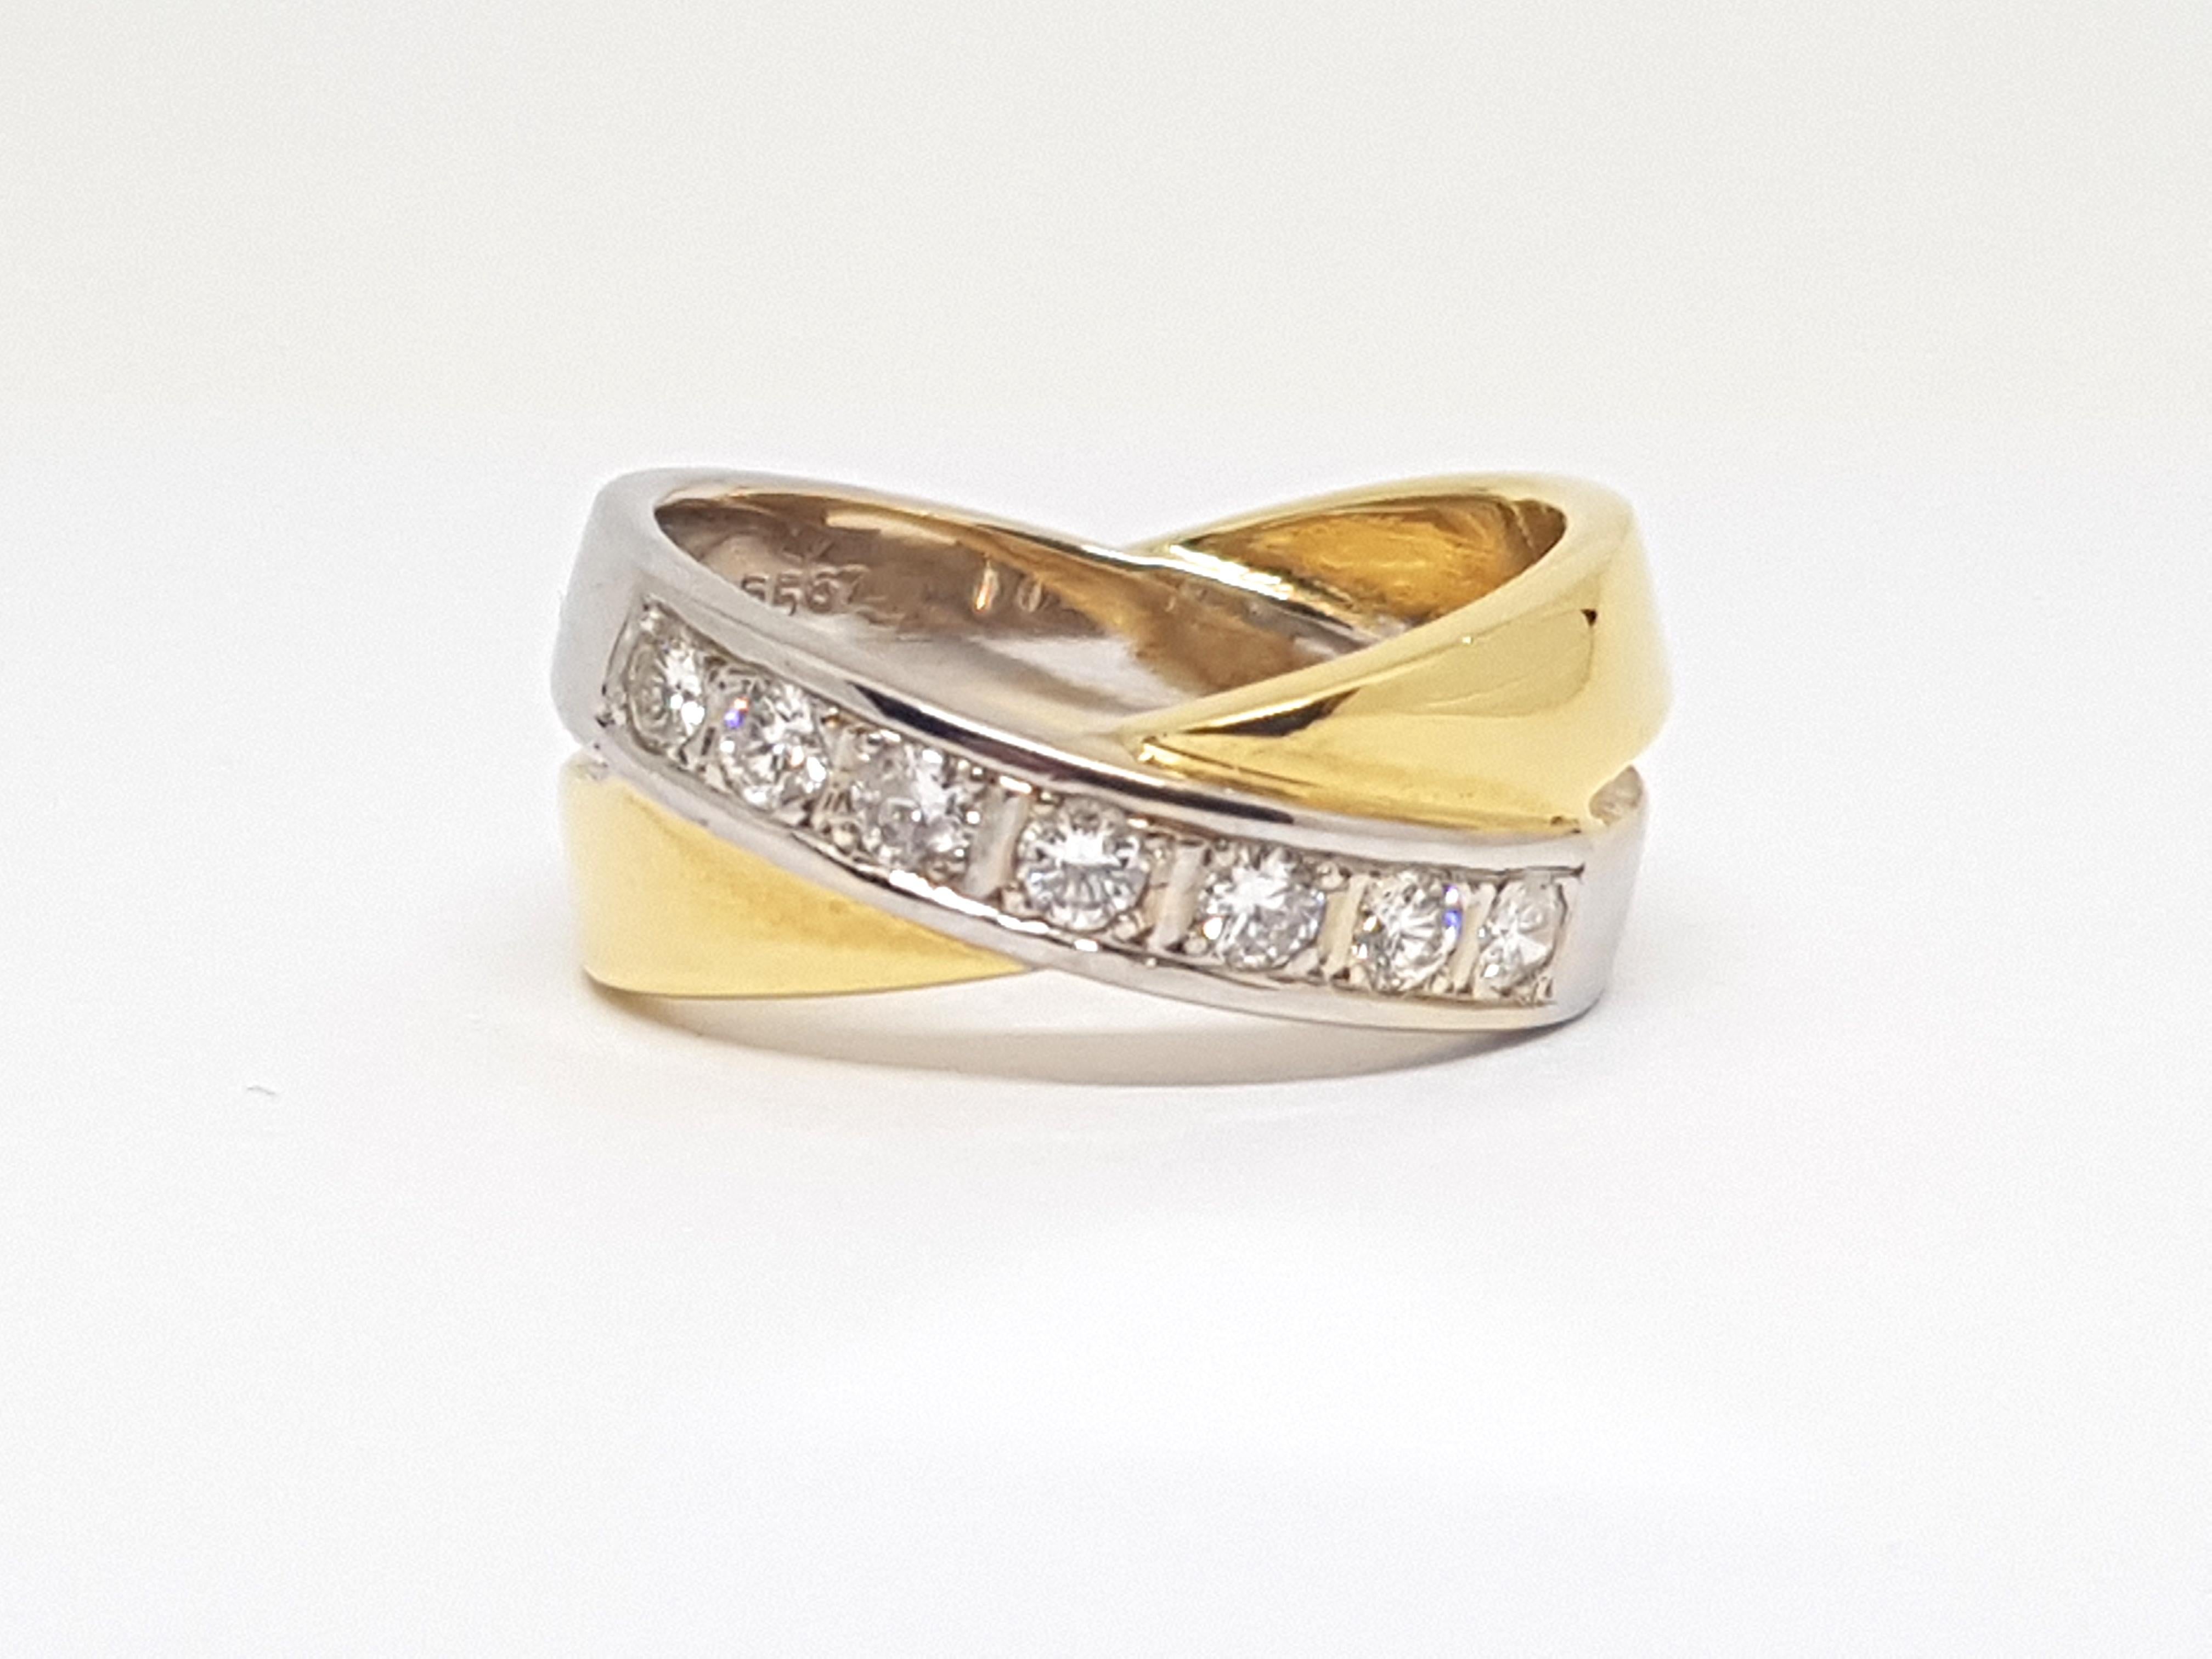 Gold: 18K Yellow & White Gold. 
Weight: 10,03 gr. 
Diamonds: 0,70ct. G / VS 
Width: 0,9 cm 
Ringsize: 54 / 17,25mm 
Free resizing of ring up to size 70 / 22mm 
Shipping: free worldwide insured shipping 
Please take a look at my other pieces of